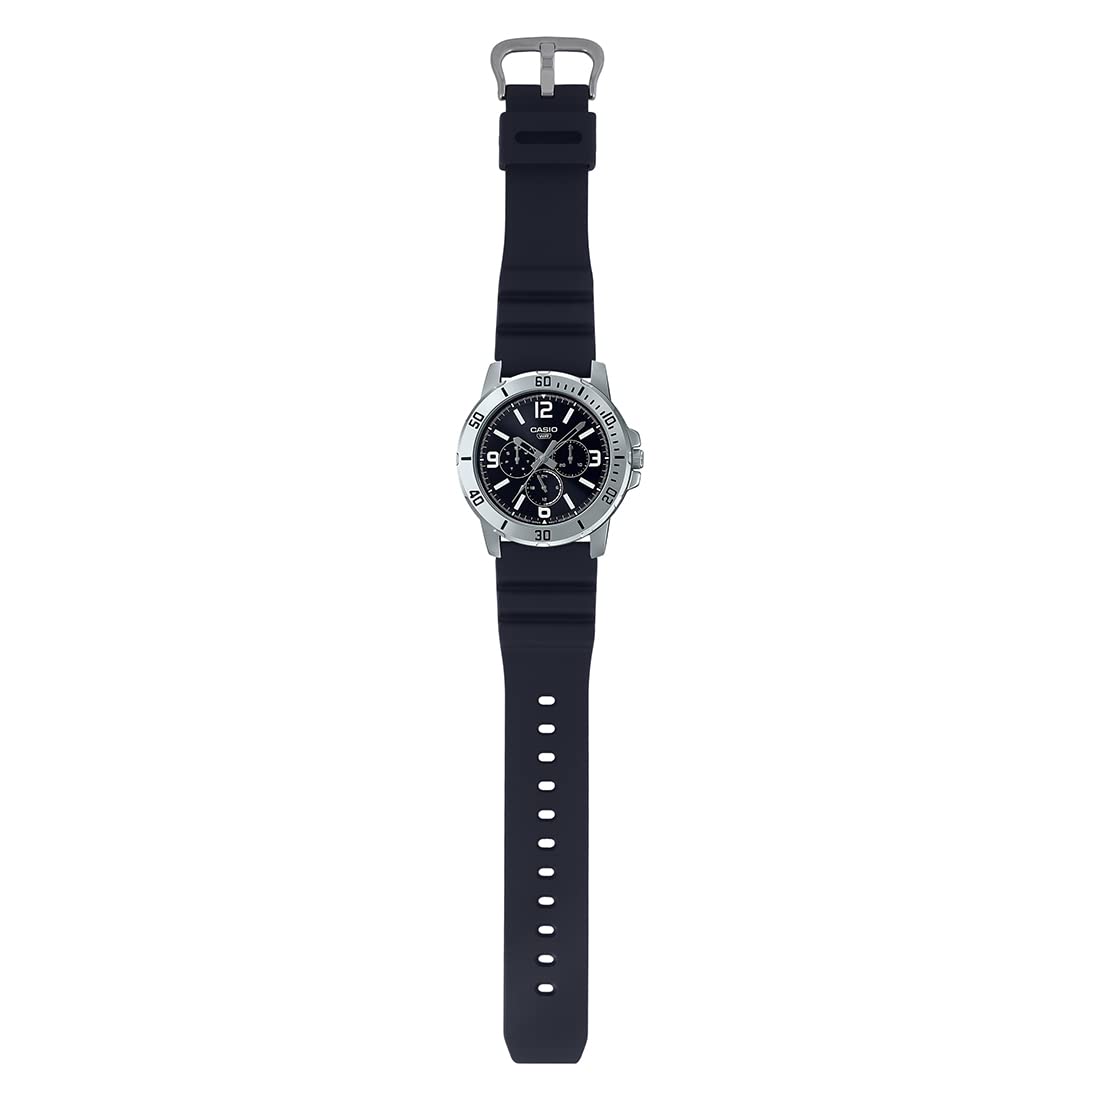 Casio Analog Black Dial Men's Watch - MTP-VD300-1BUDF | Watches & Accessories | Best Watches in Bahrain | Halabh.com